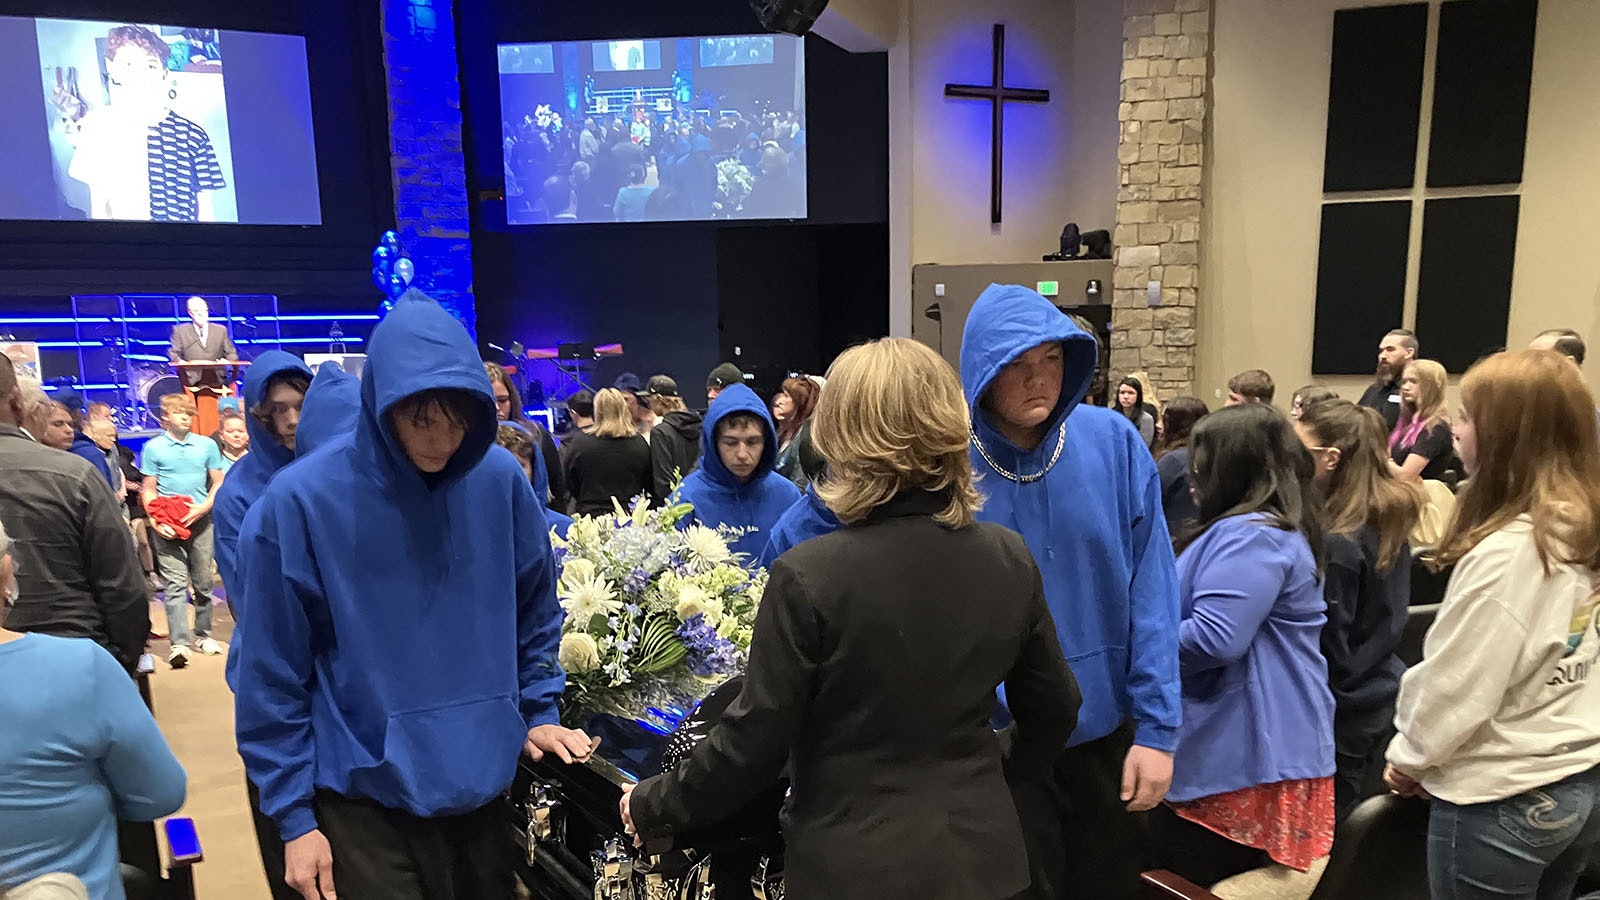 Bobby Maher’s brothers and friends served as pallbearers for his casket as the teen’s body was escorted out of the funeral service.